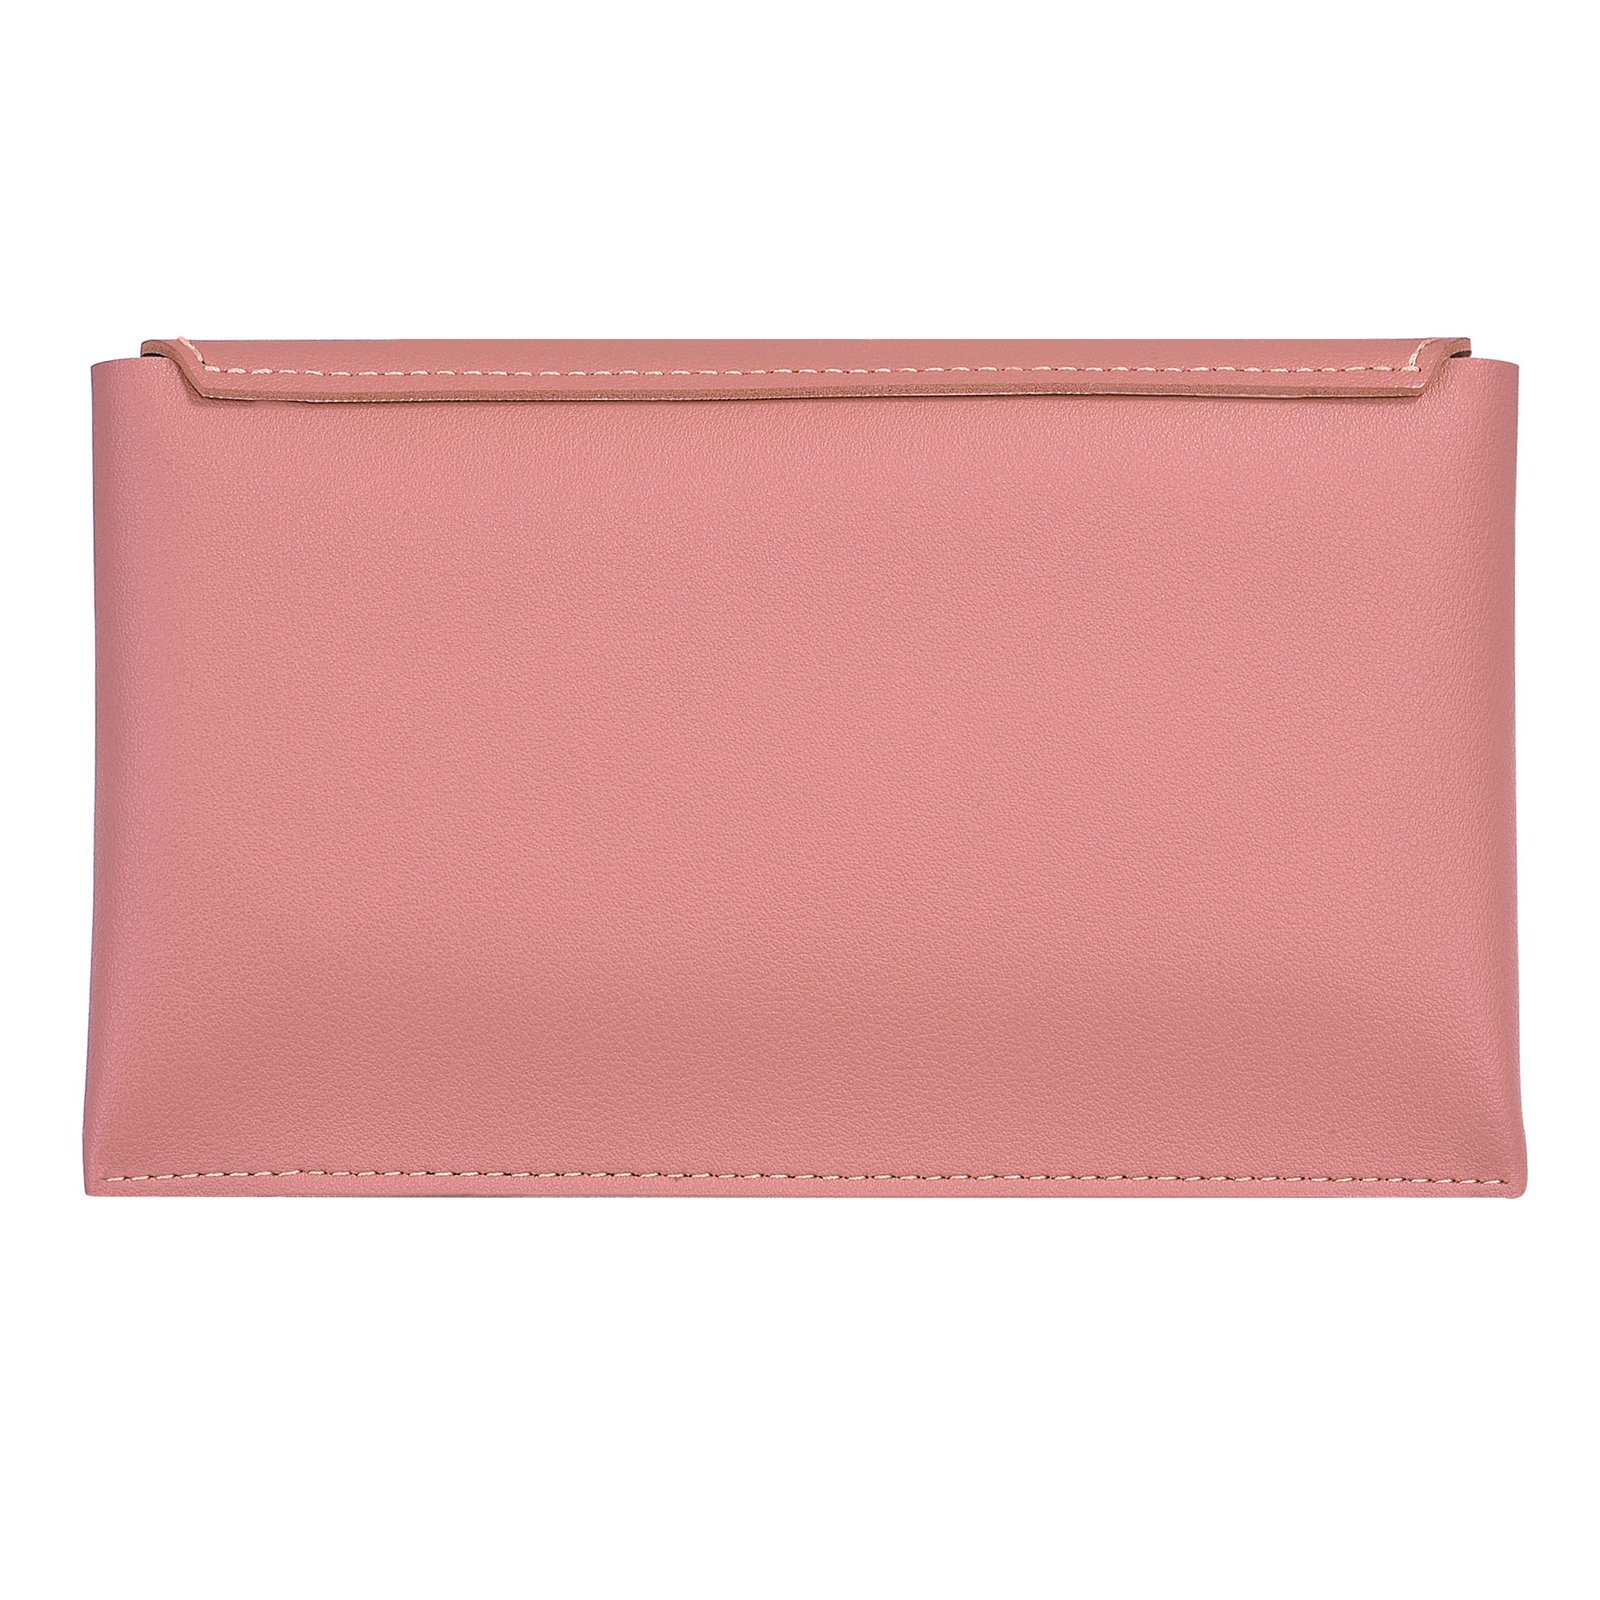 COLORS PINK WOMEN CLUTCH WITH 10 CARD SLOTS - WALRUSTORE